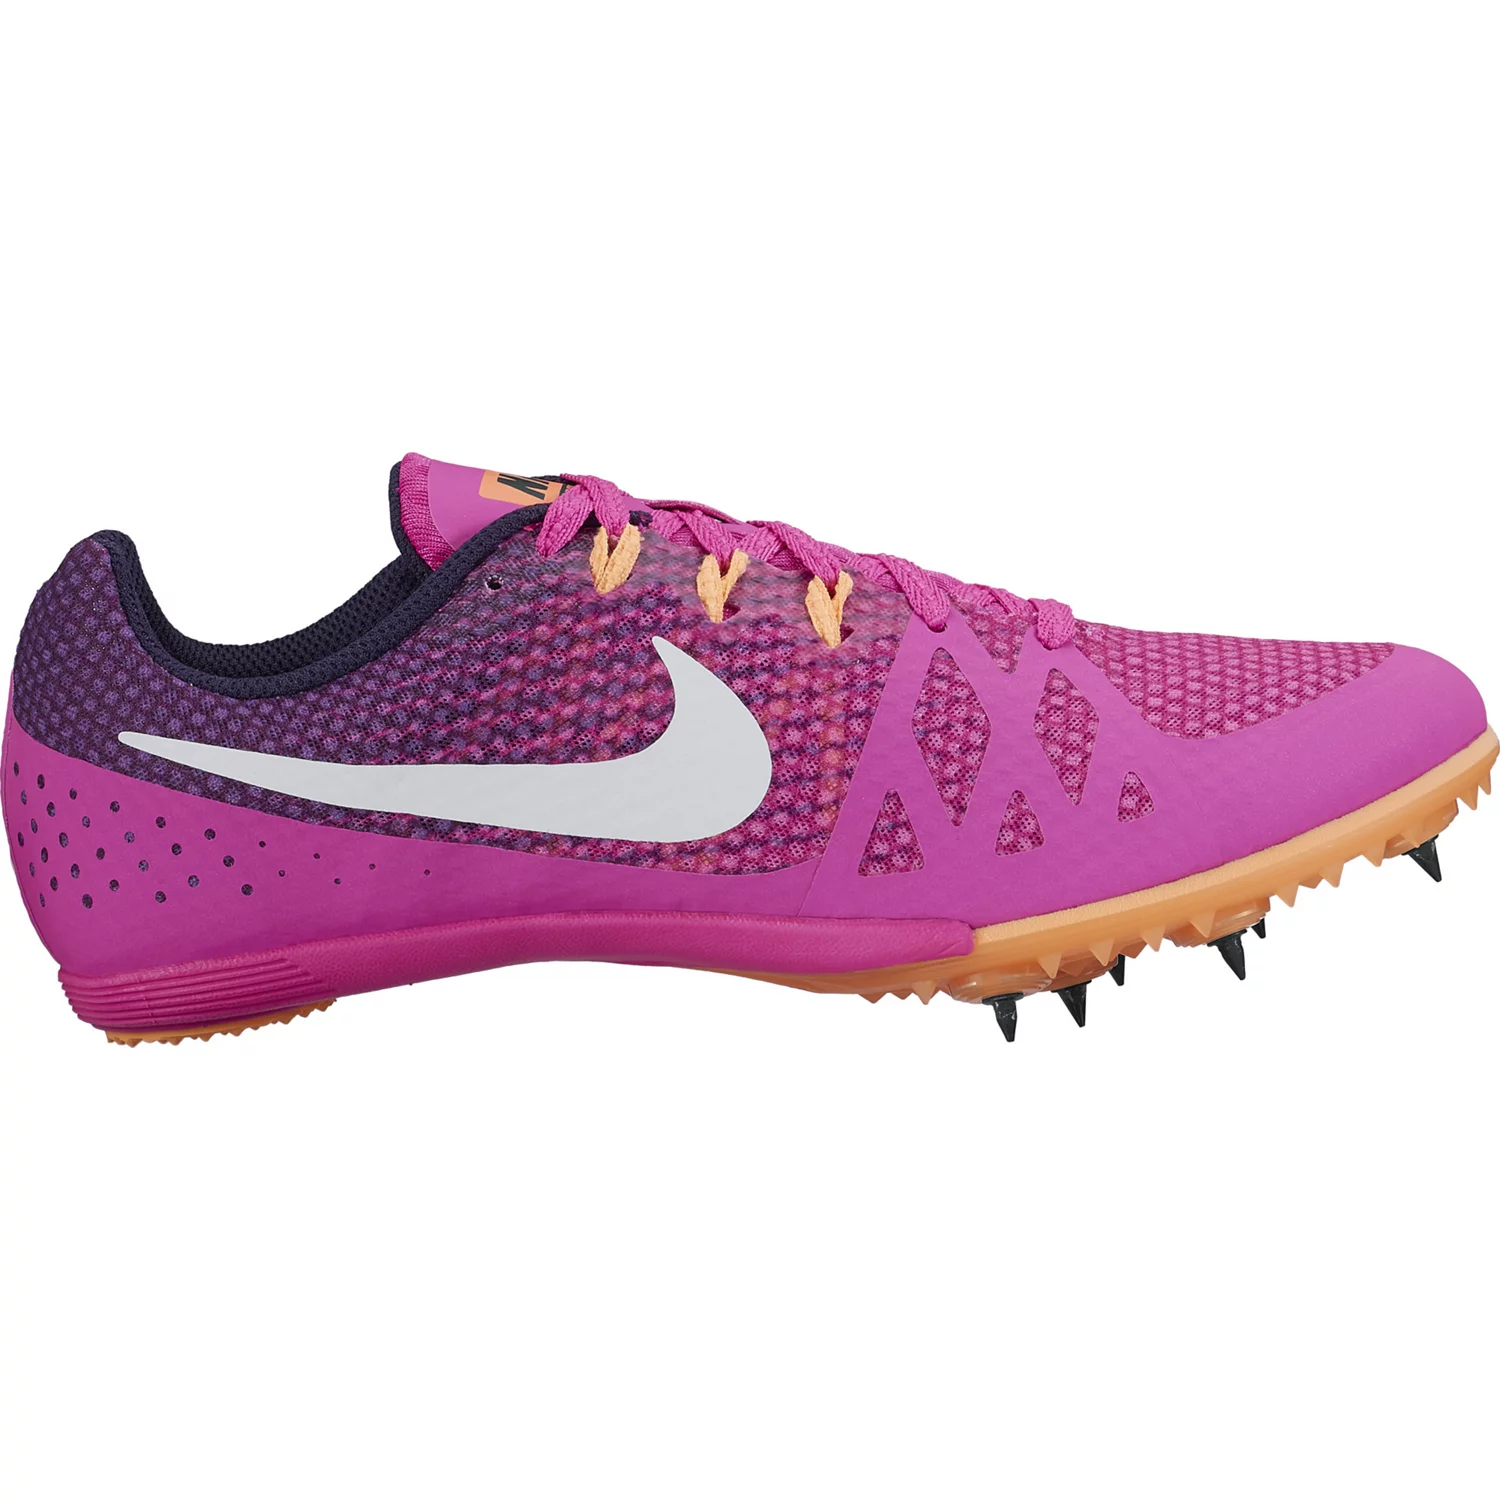 Women's Cleats | Women's Sports Cleats, Women's Softball Cleats | Academy